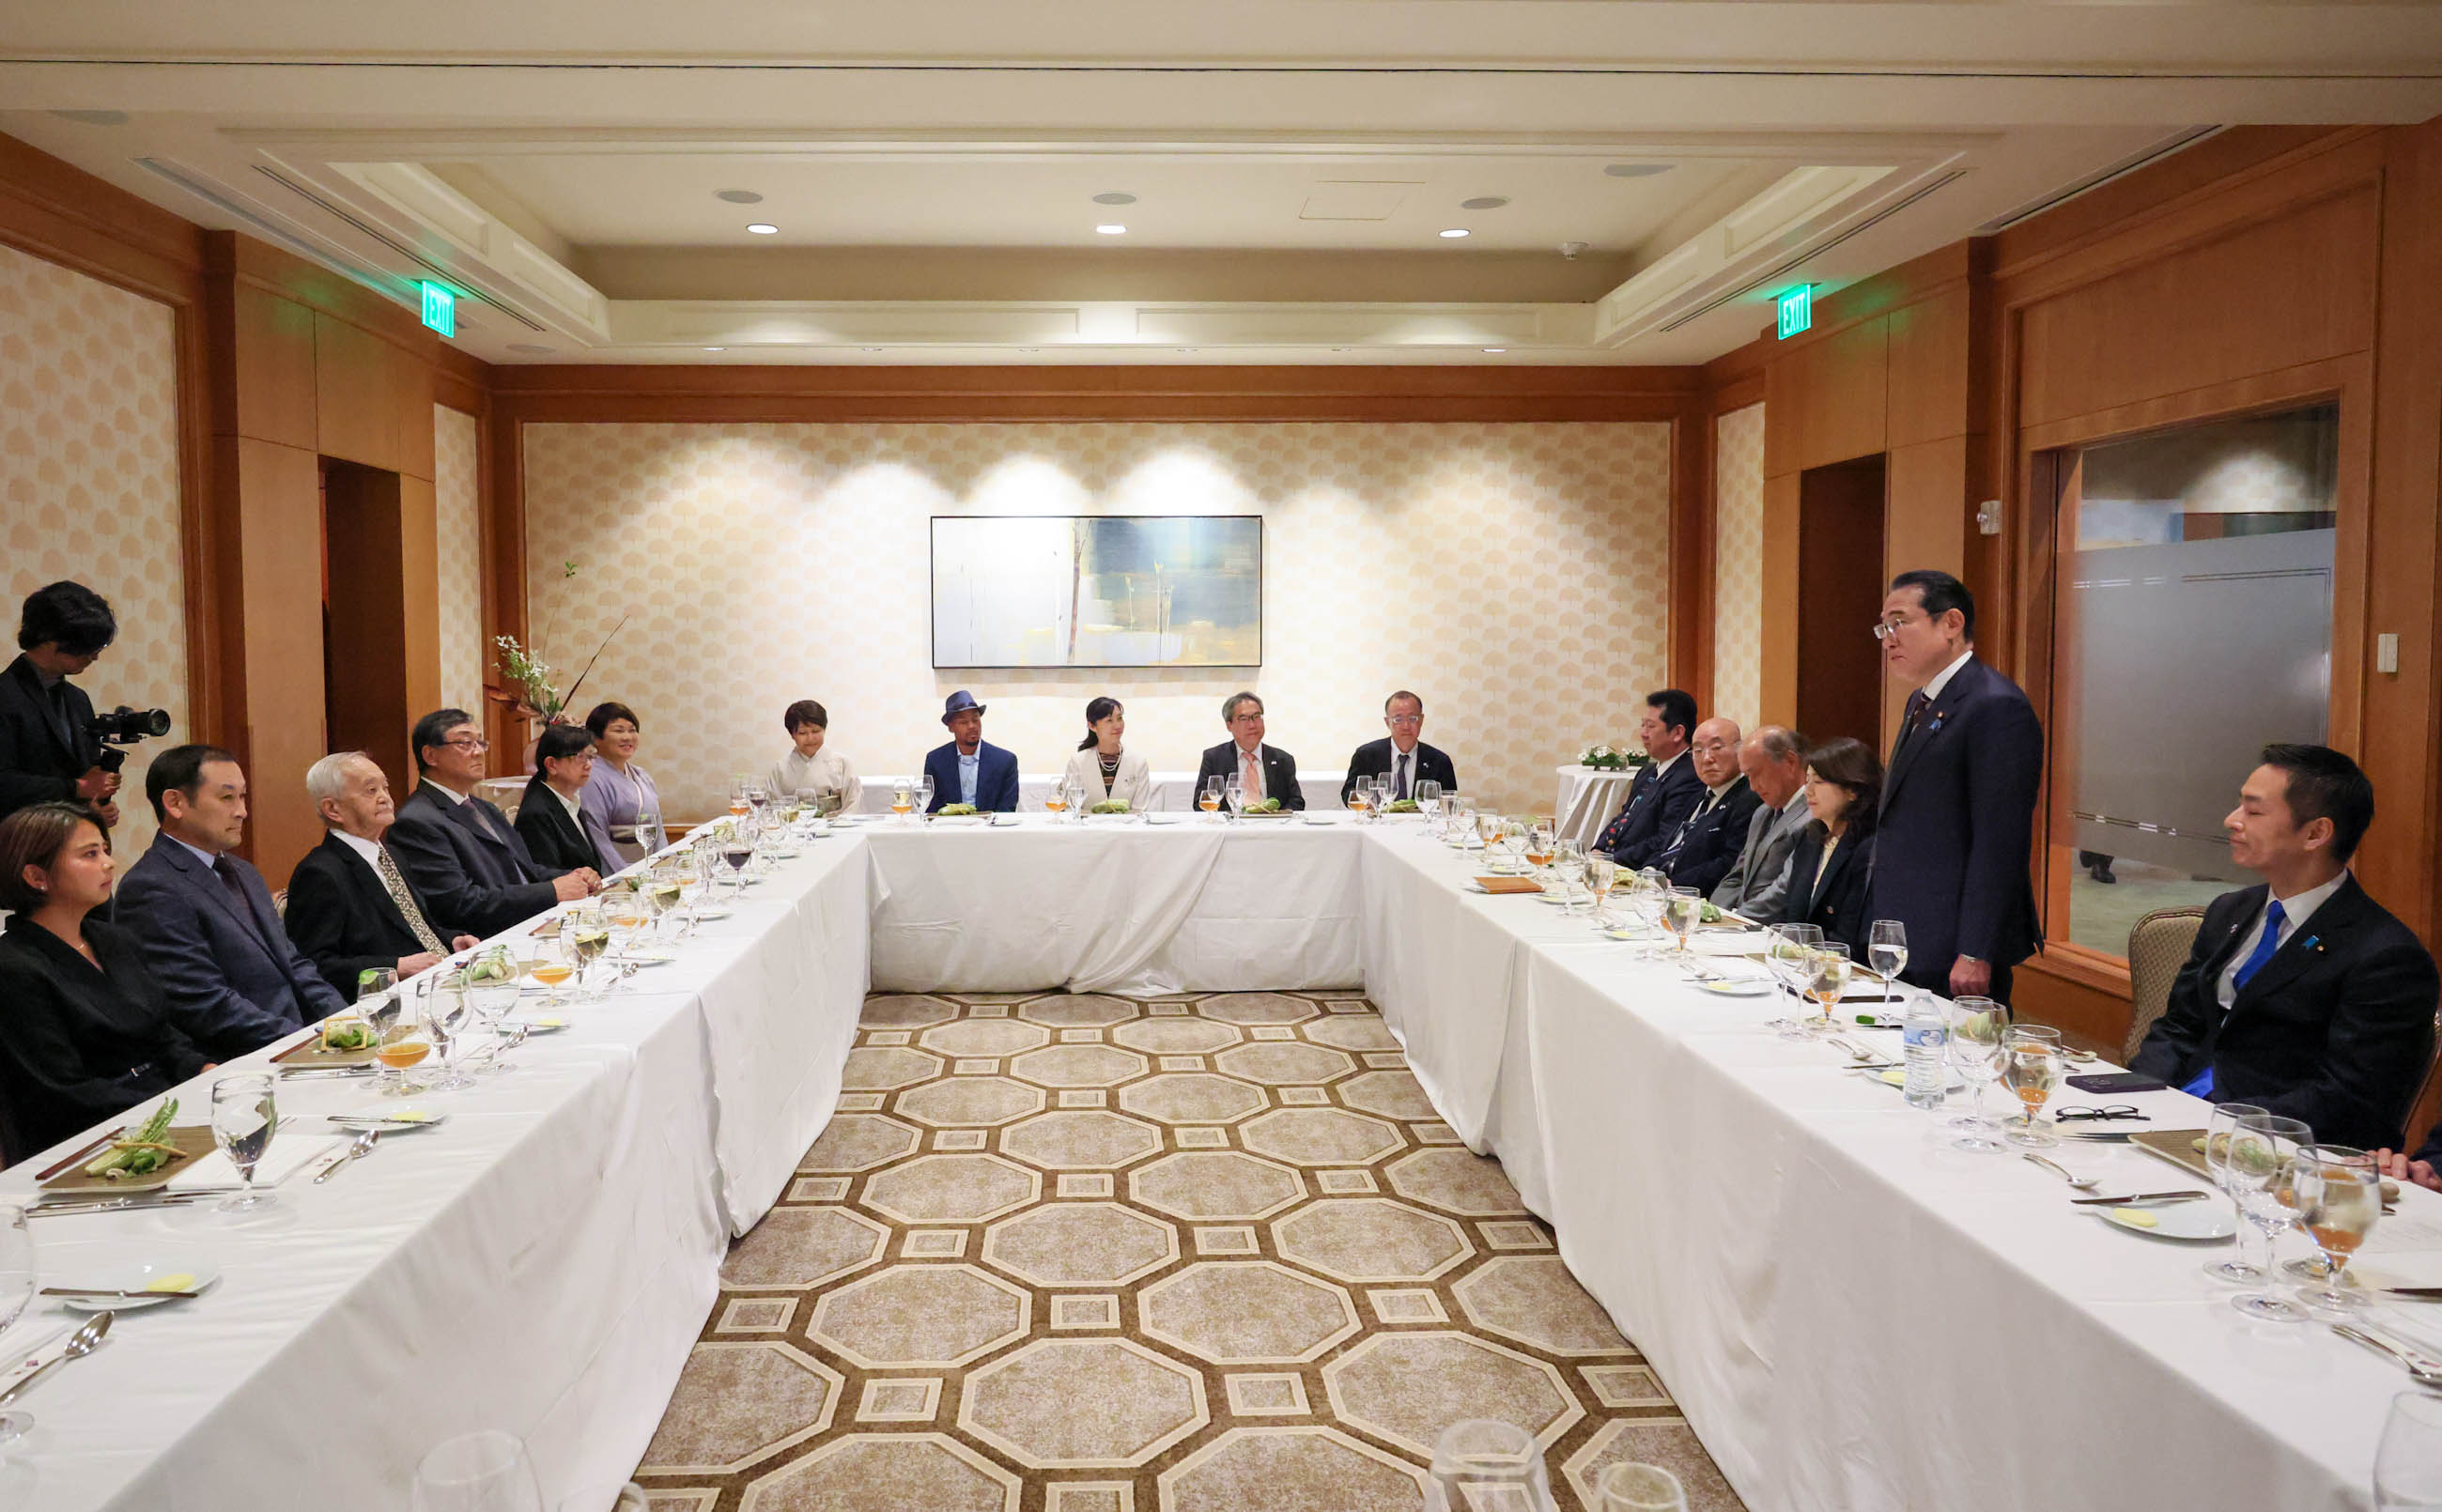 Dinner with individuals who have ties with Japan residing in the State of North Carolina (1)